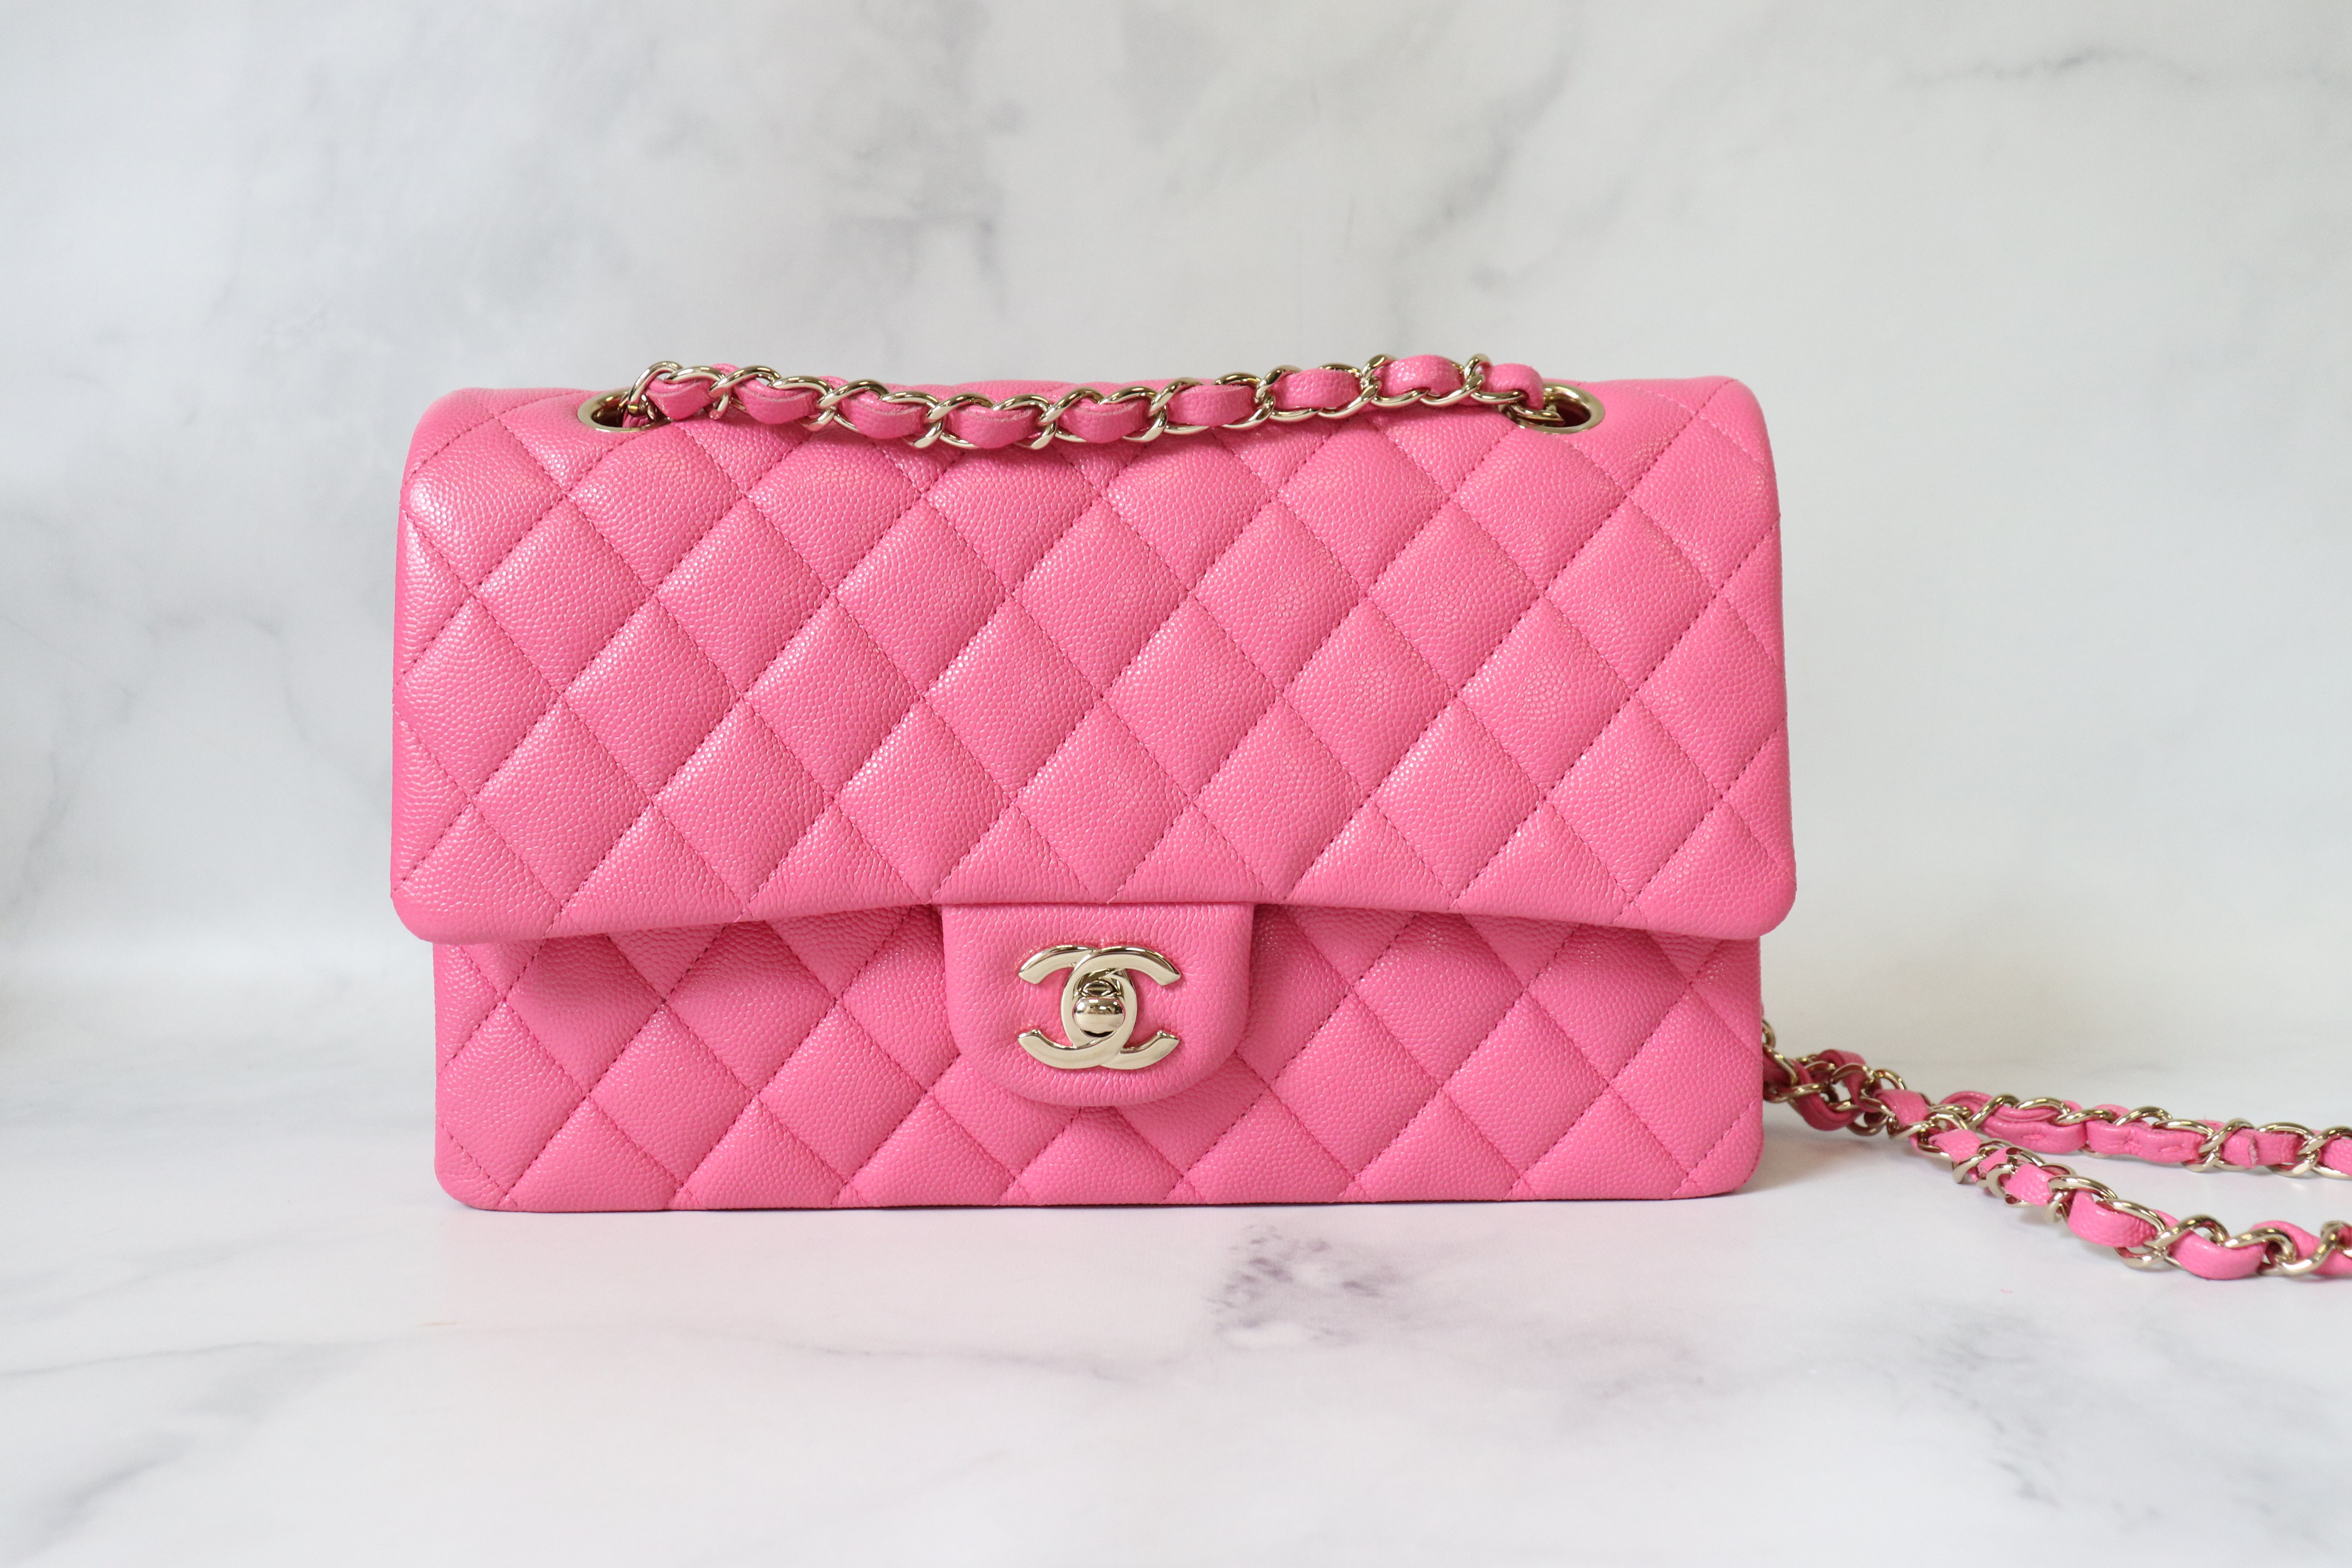 Chanel Classic Medium Double Flap, 21C Pink Caviar Leather, Gold Hardware,  Preowned (Mint Condition) in Box